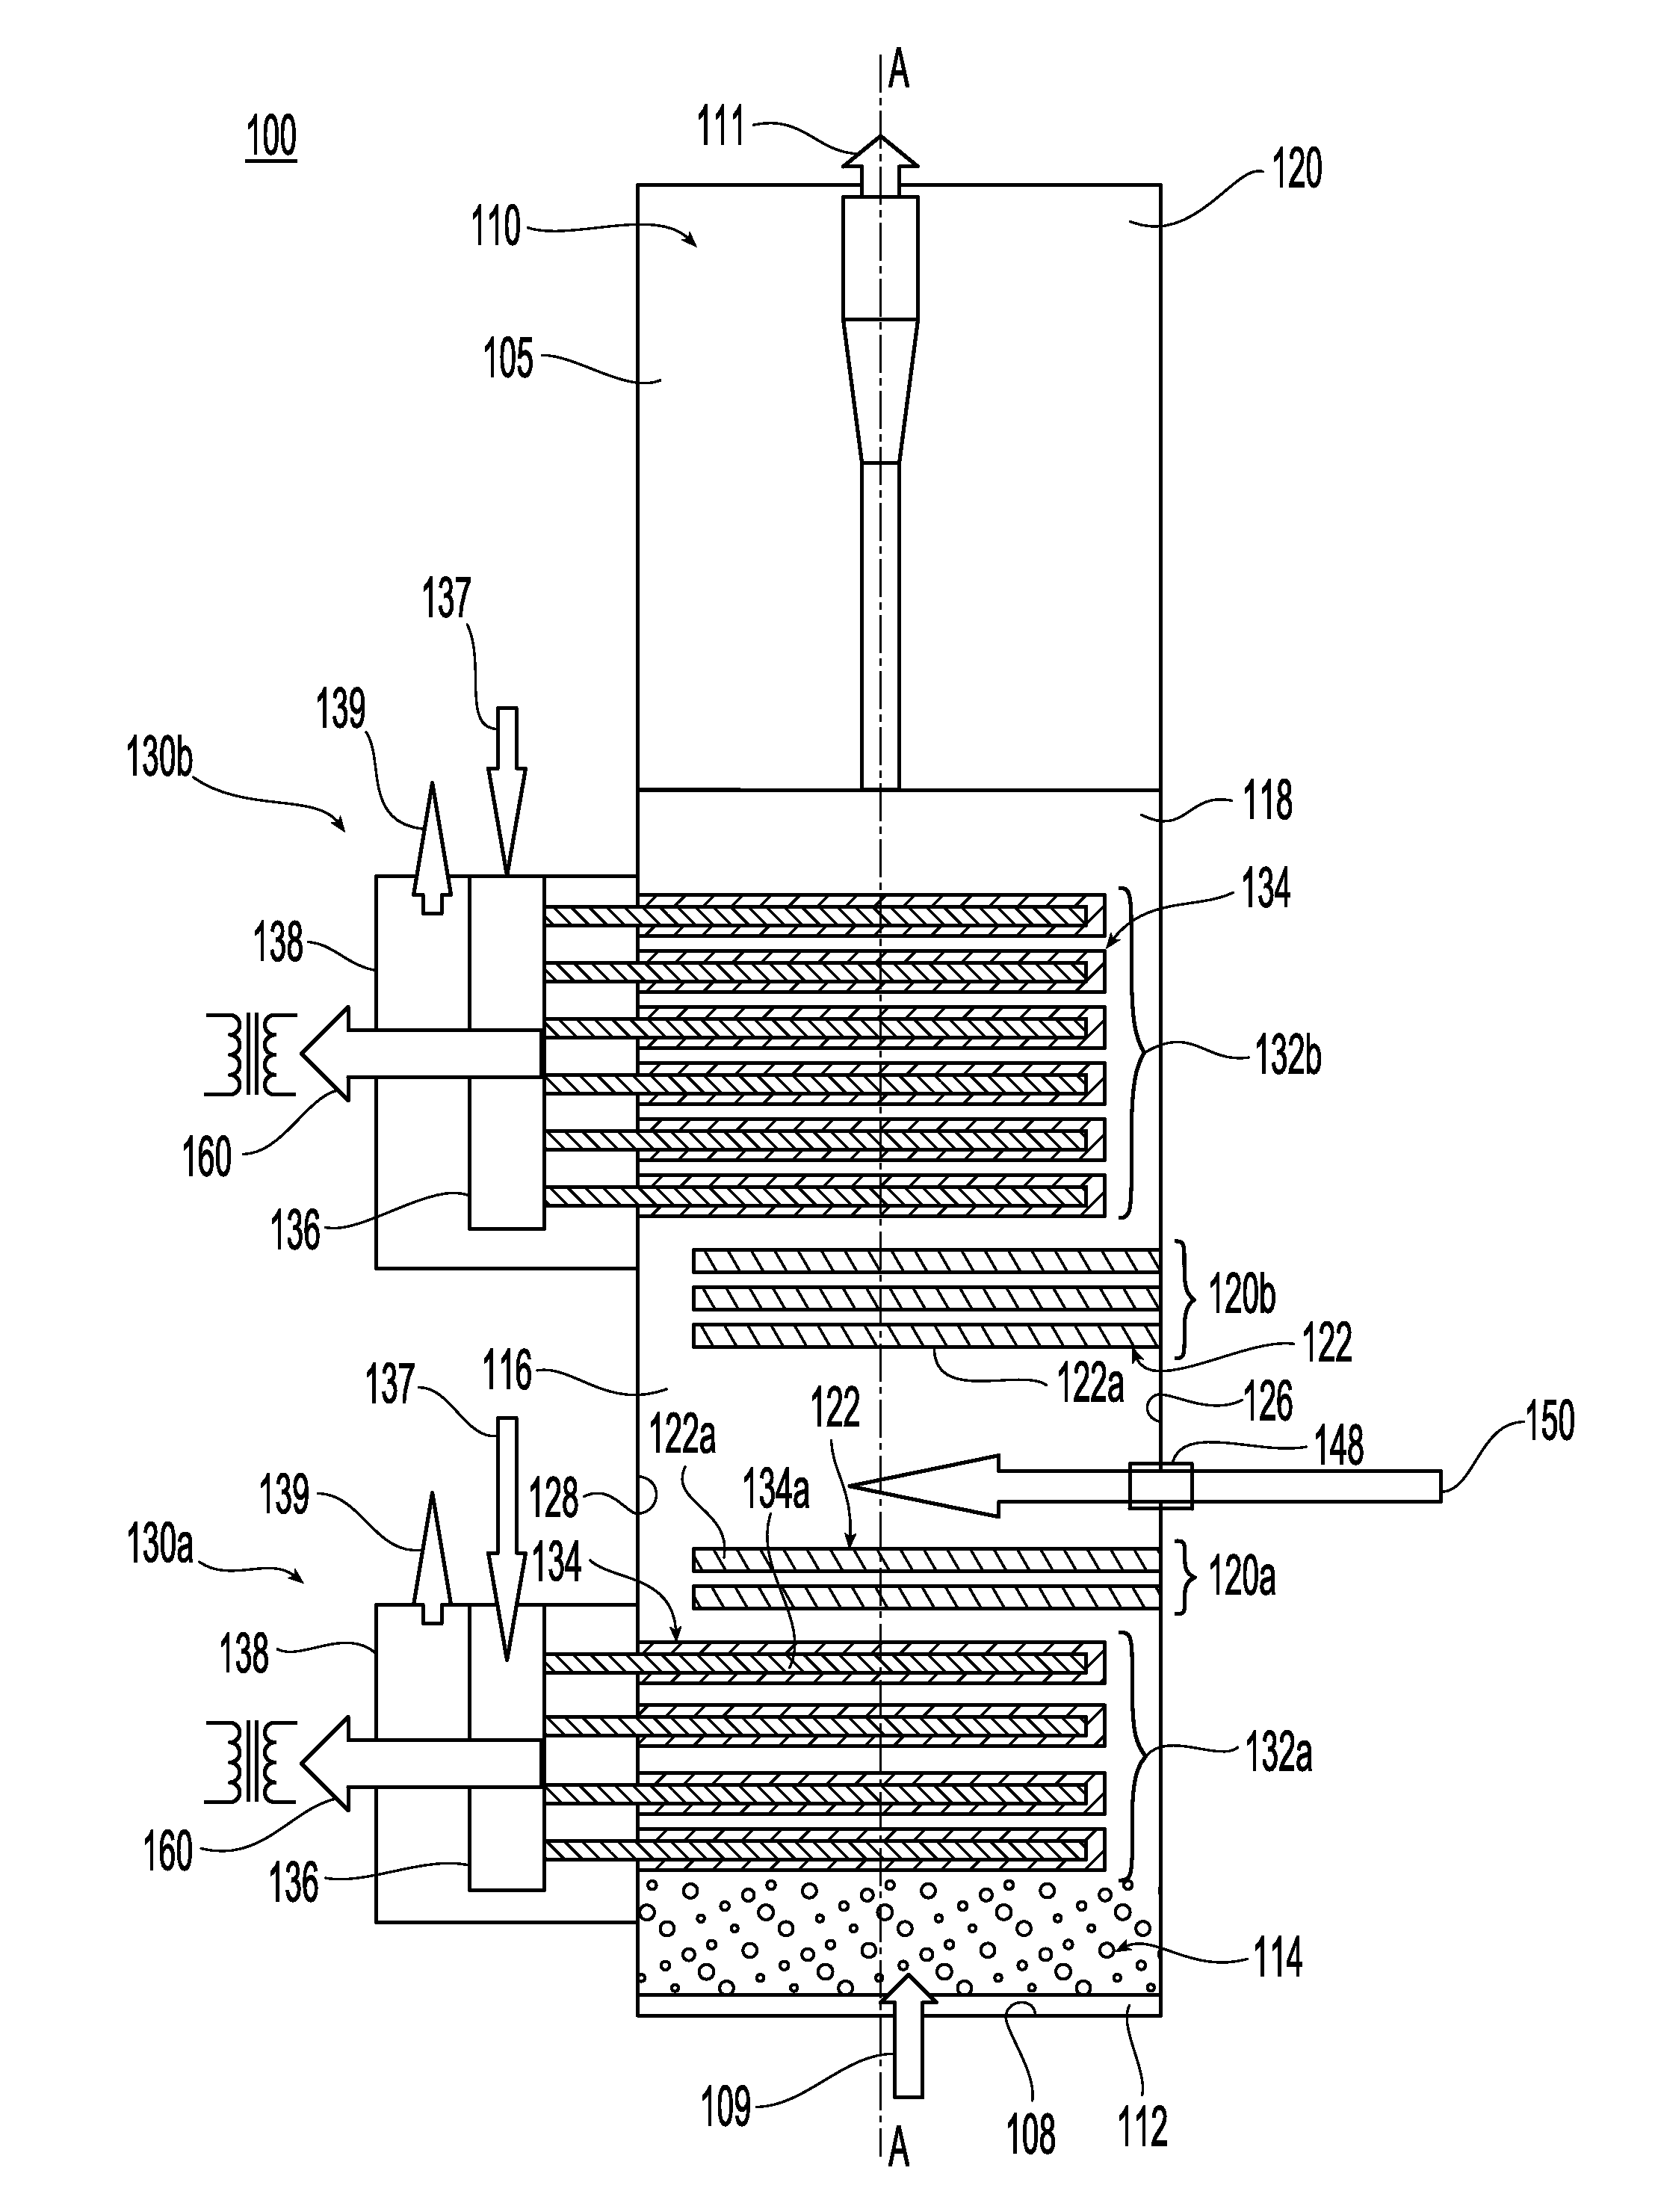 Gasifier Having Integrated Fuel Cell Power Generation System